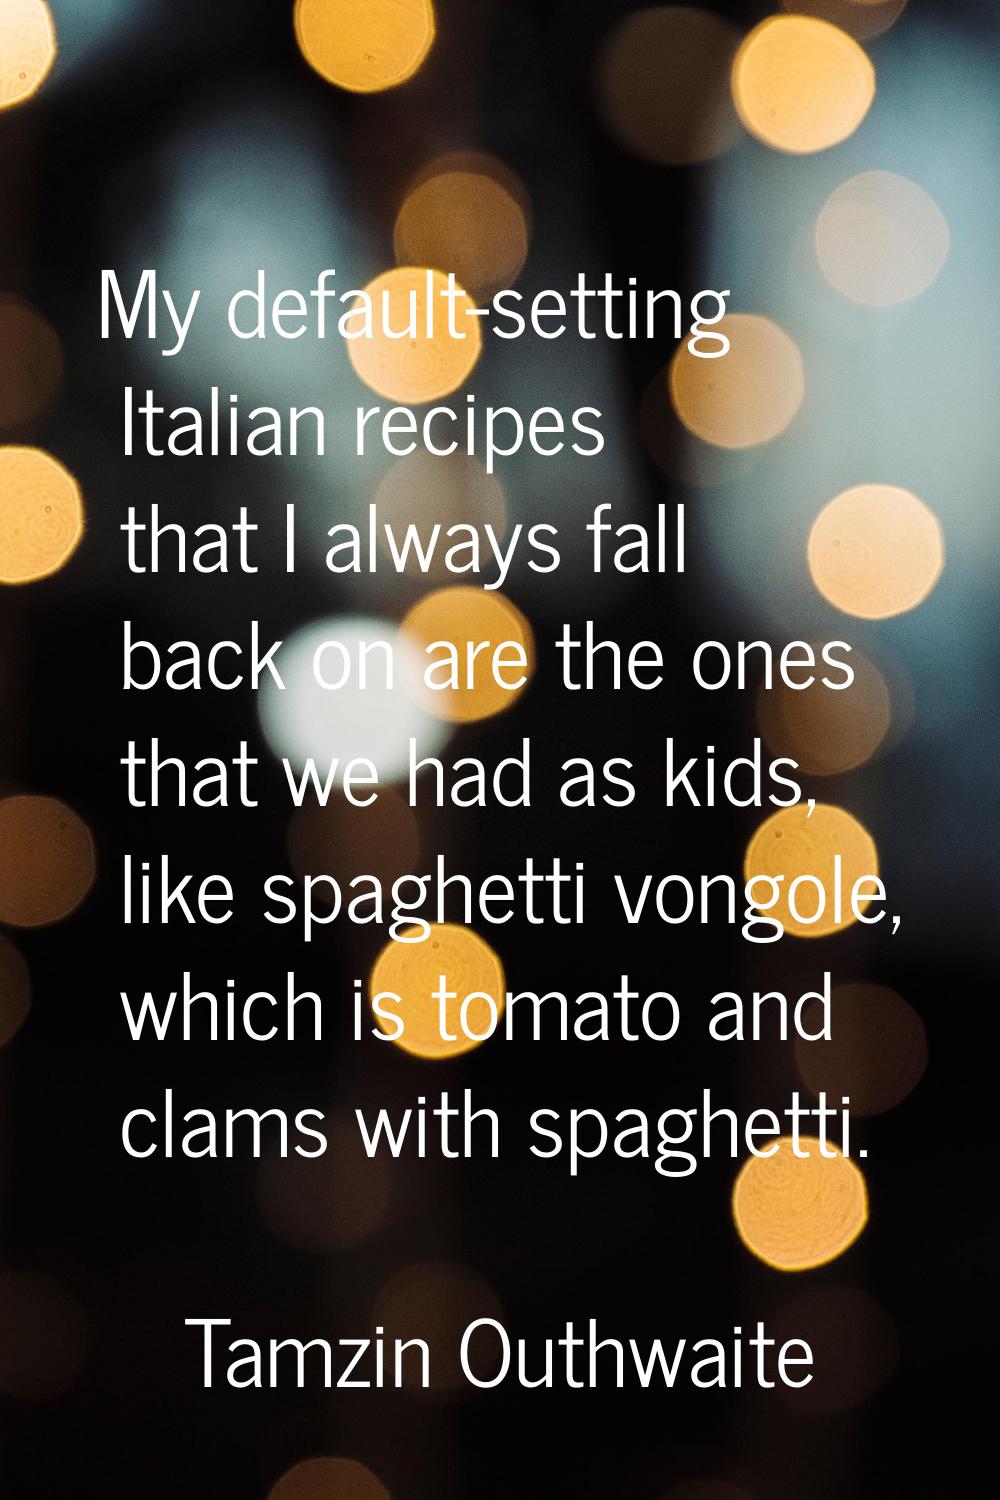 My default-setting Italian recipes that I always fall back on are the ones that we had as kids, lik